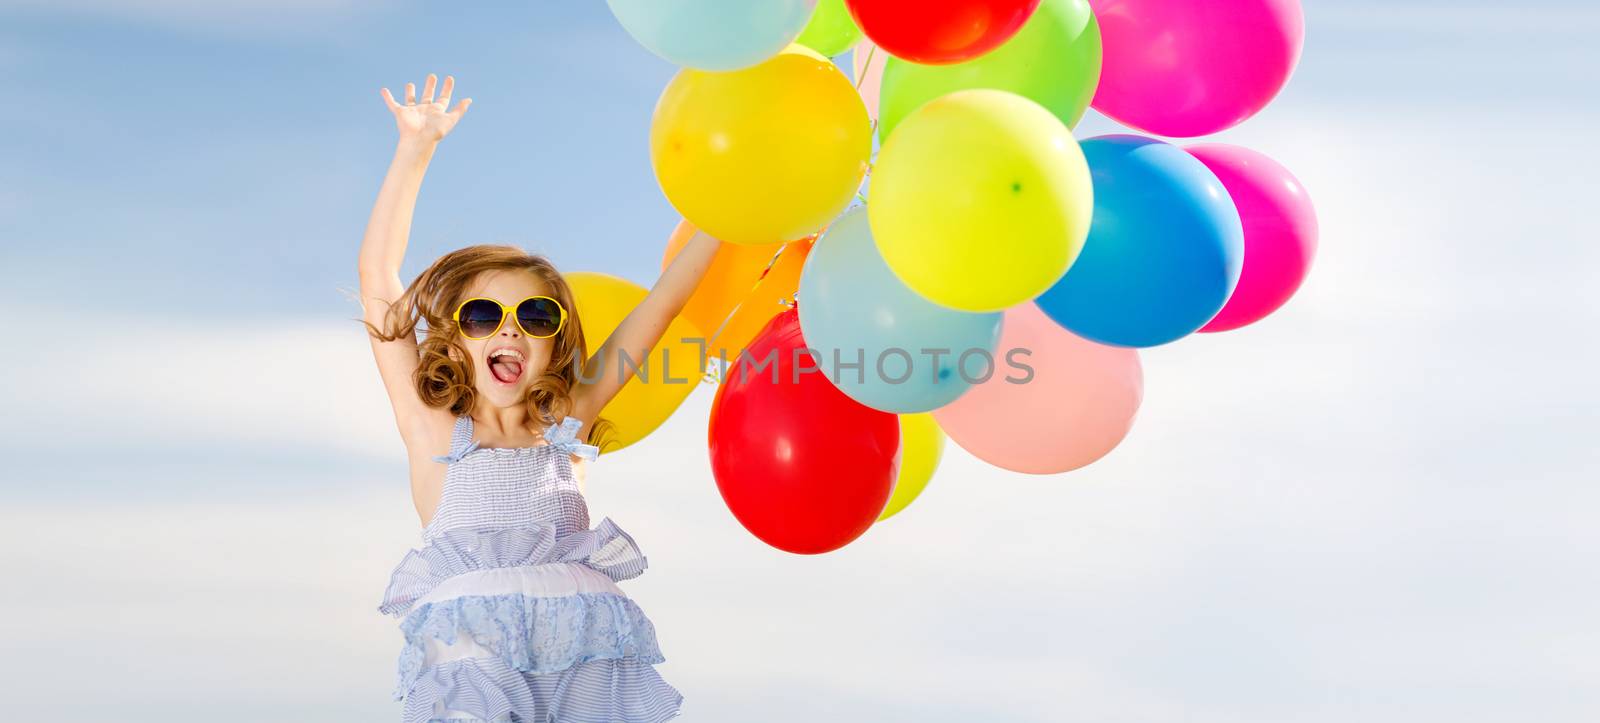 happy jumping girl with colorful balloons by dolgachov